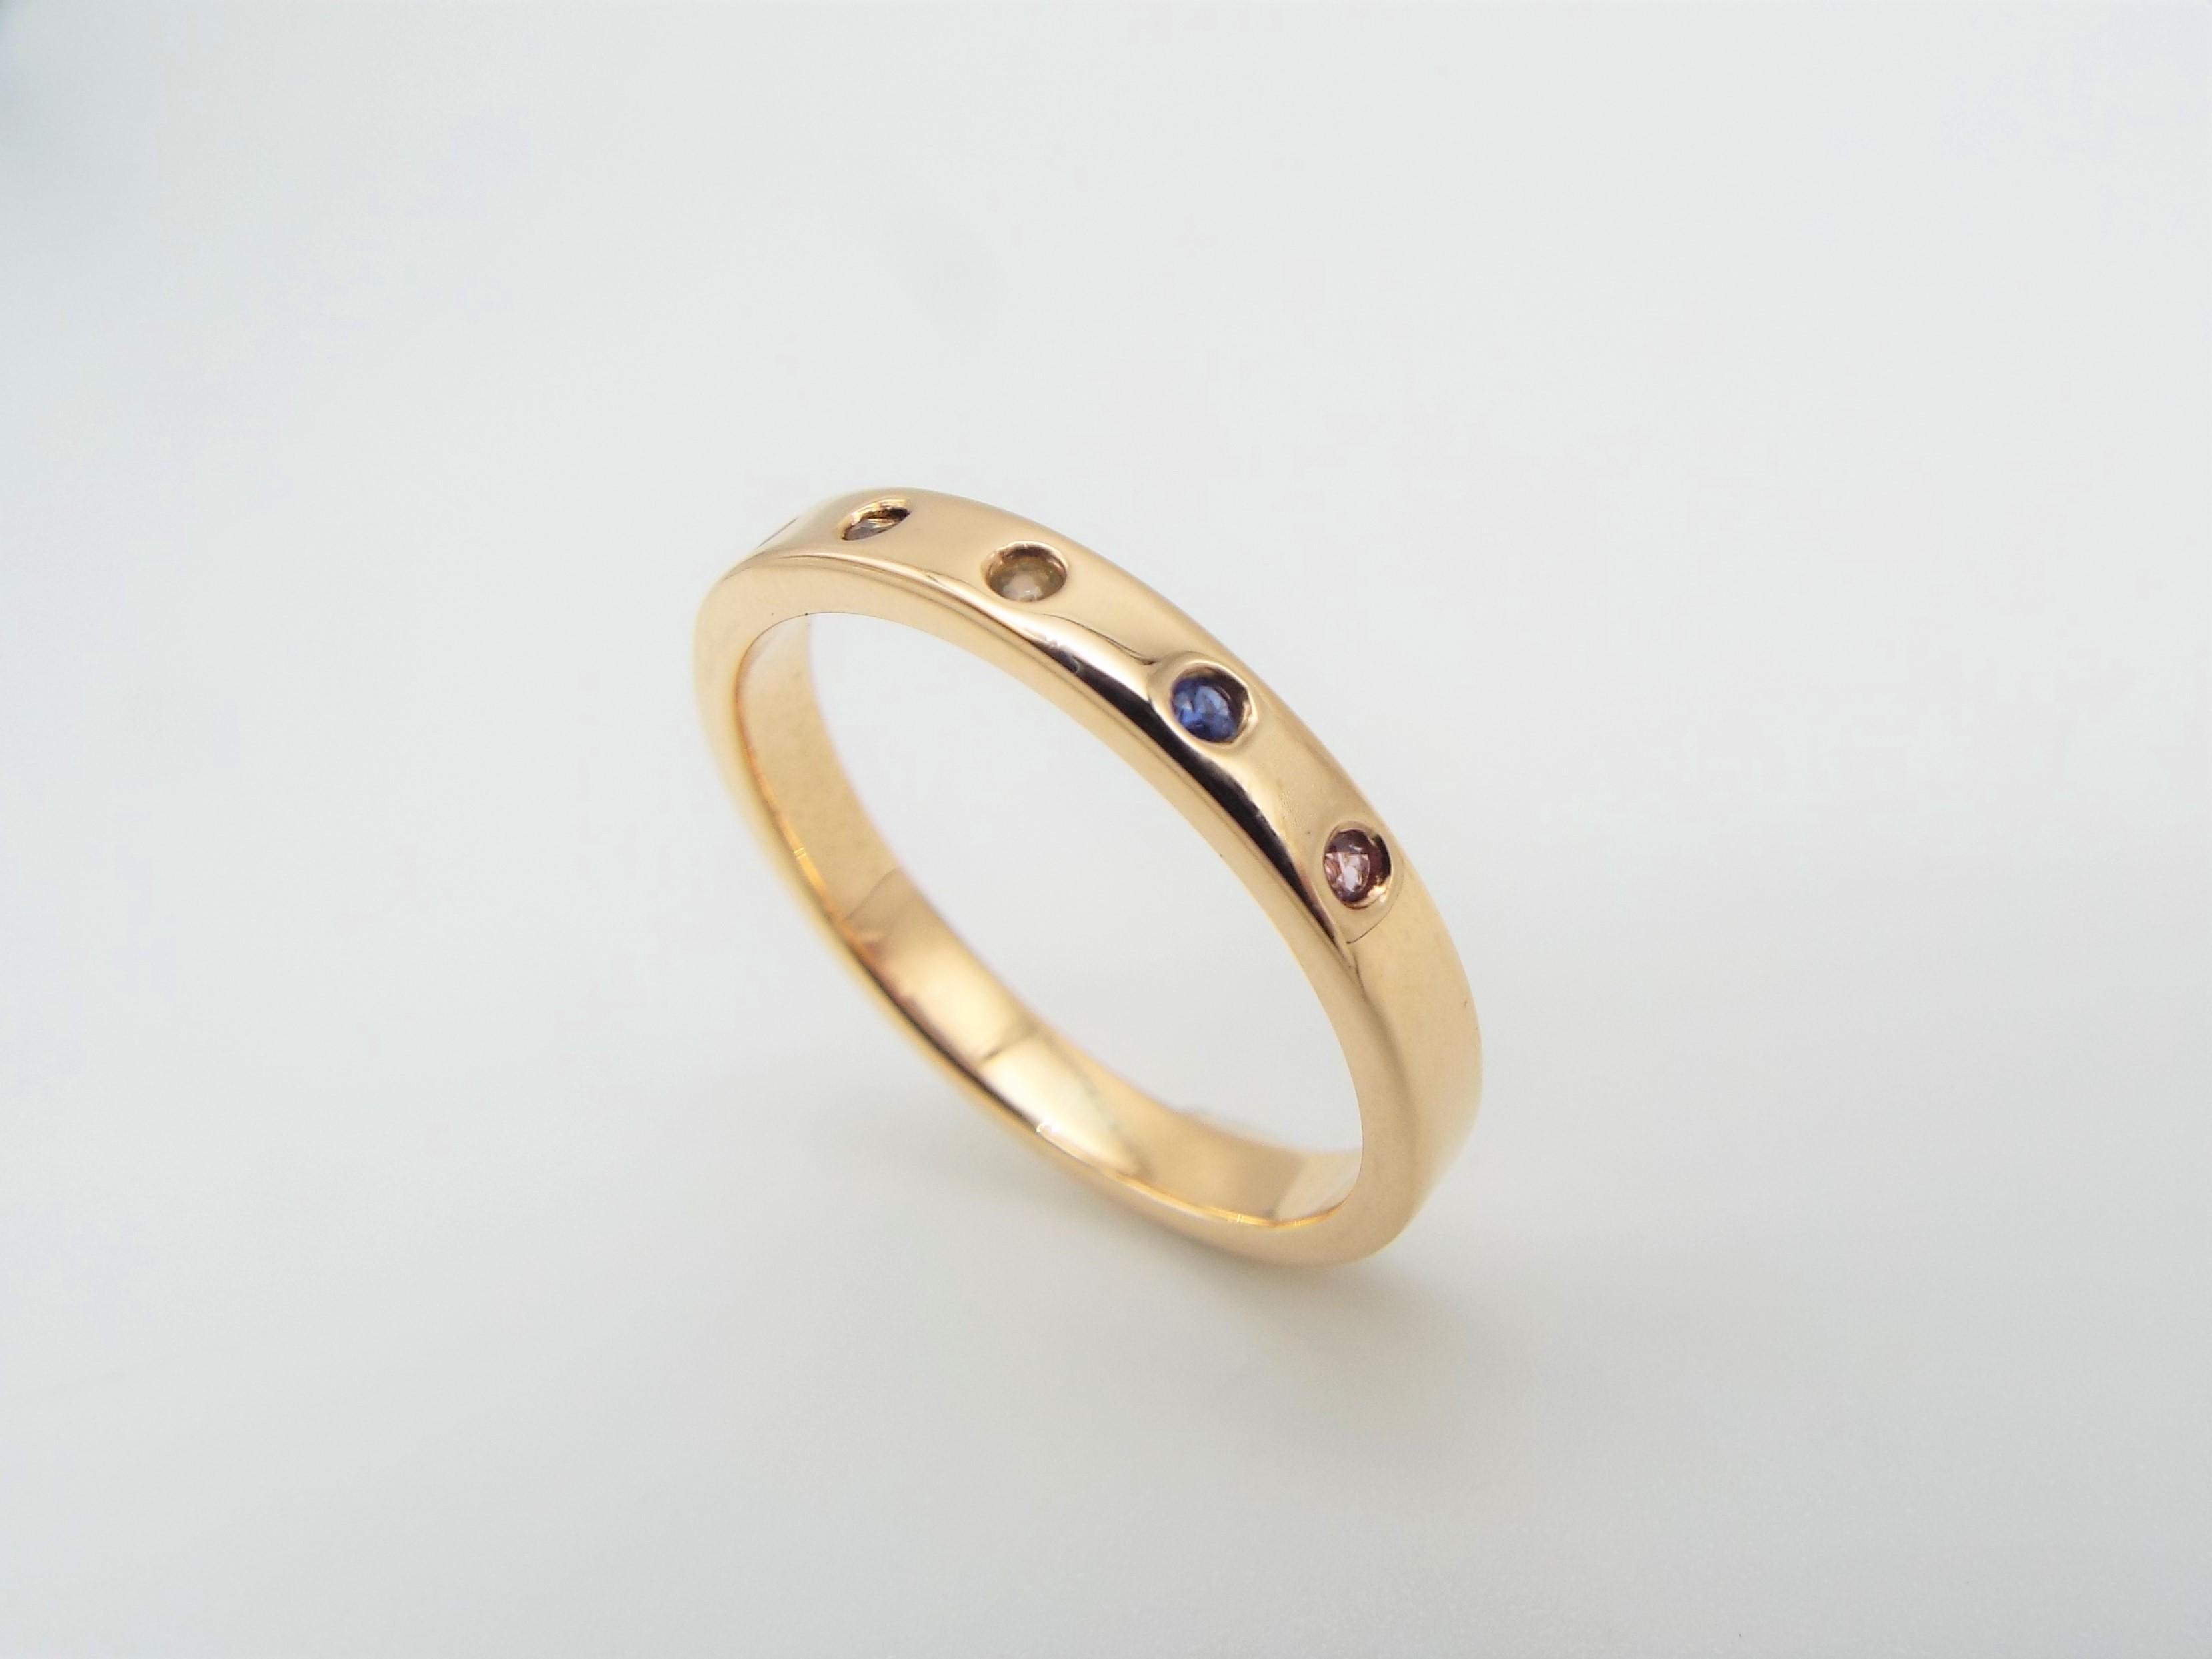 gold ring with sapphire gemstones